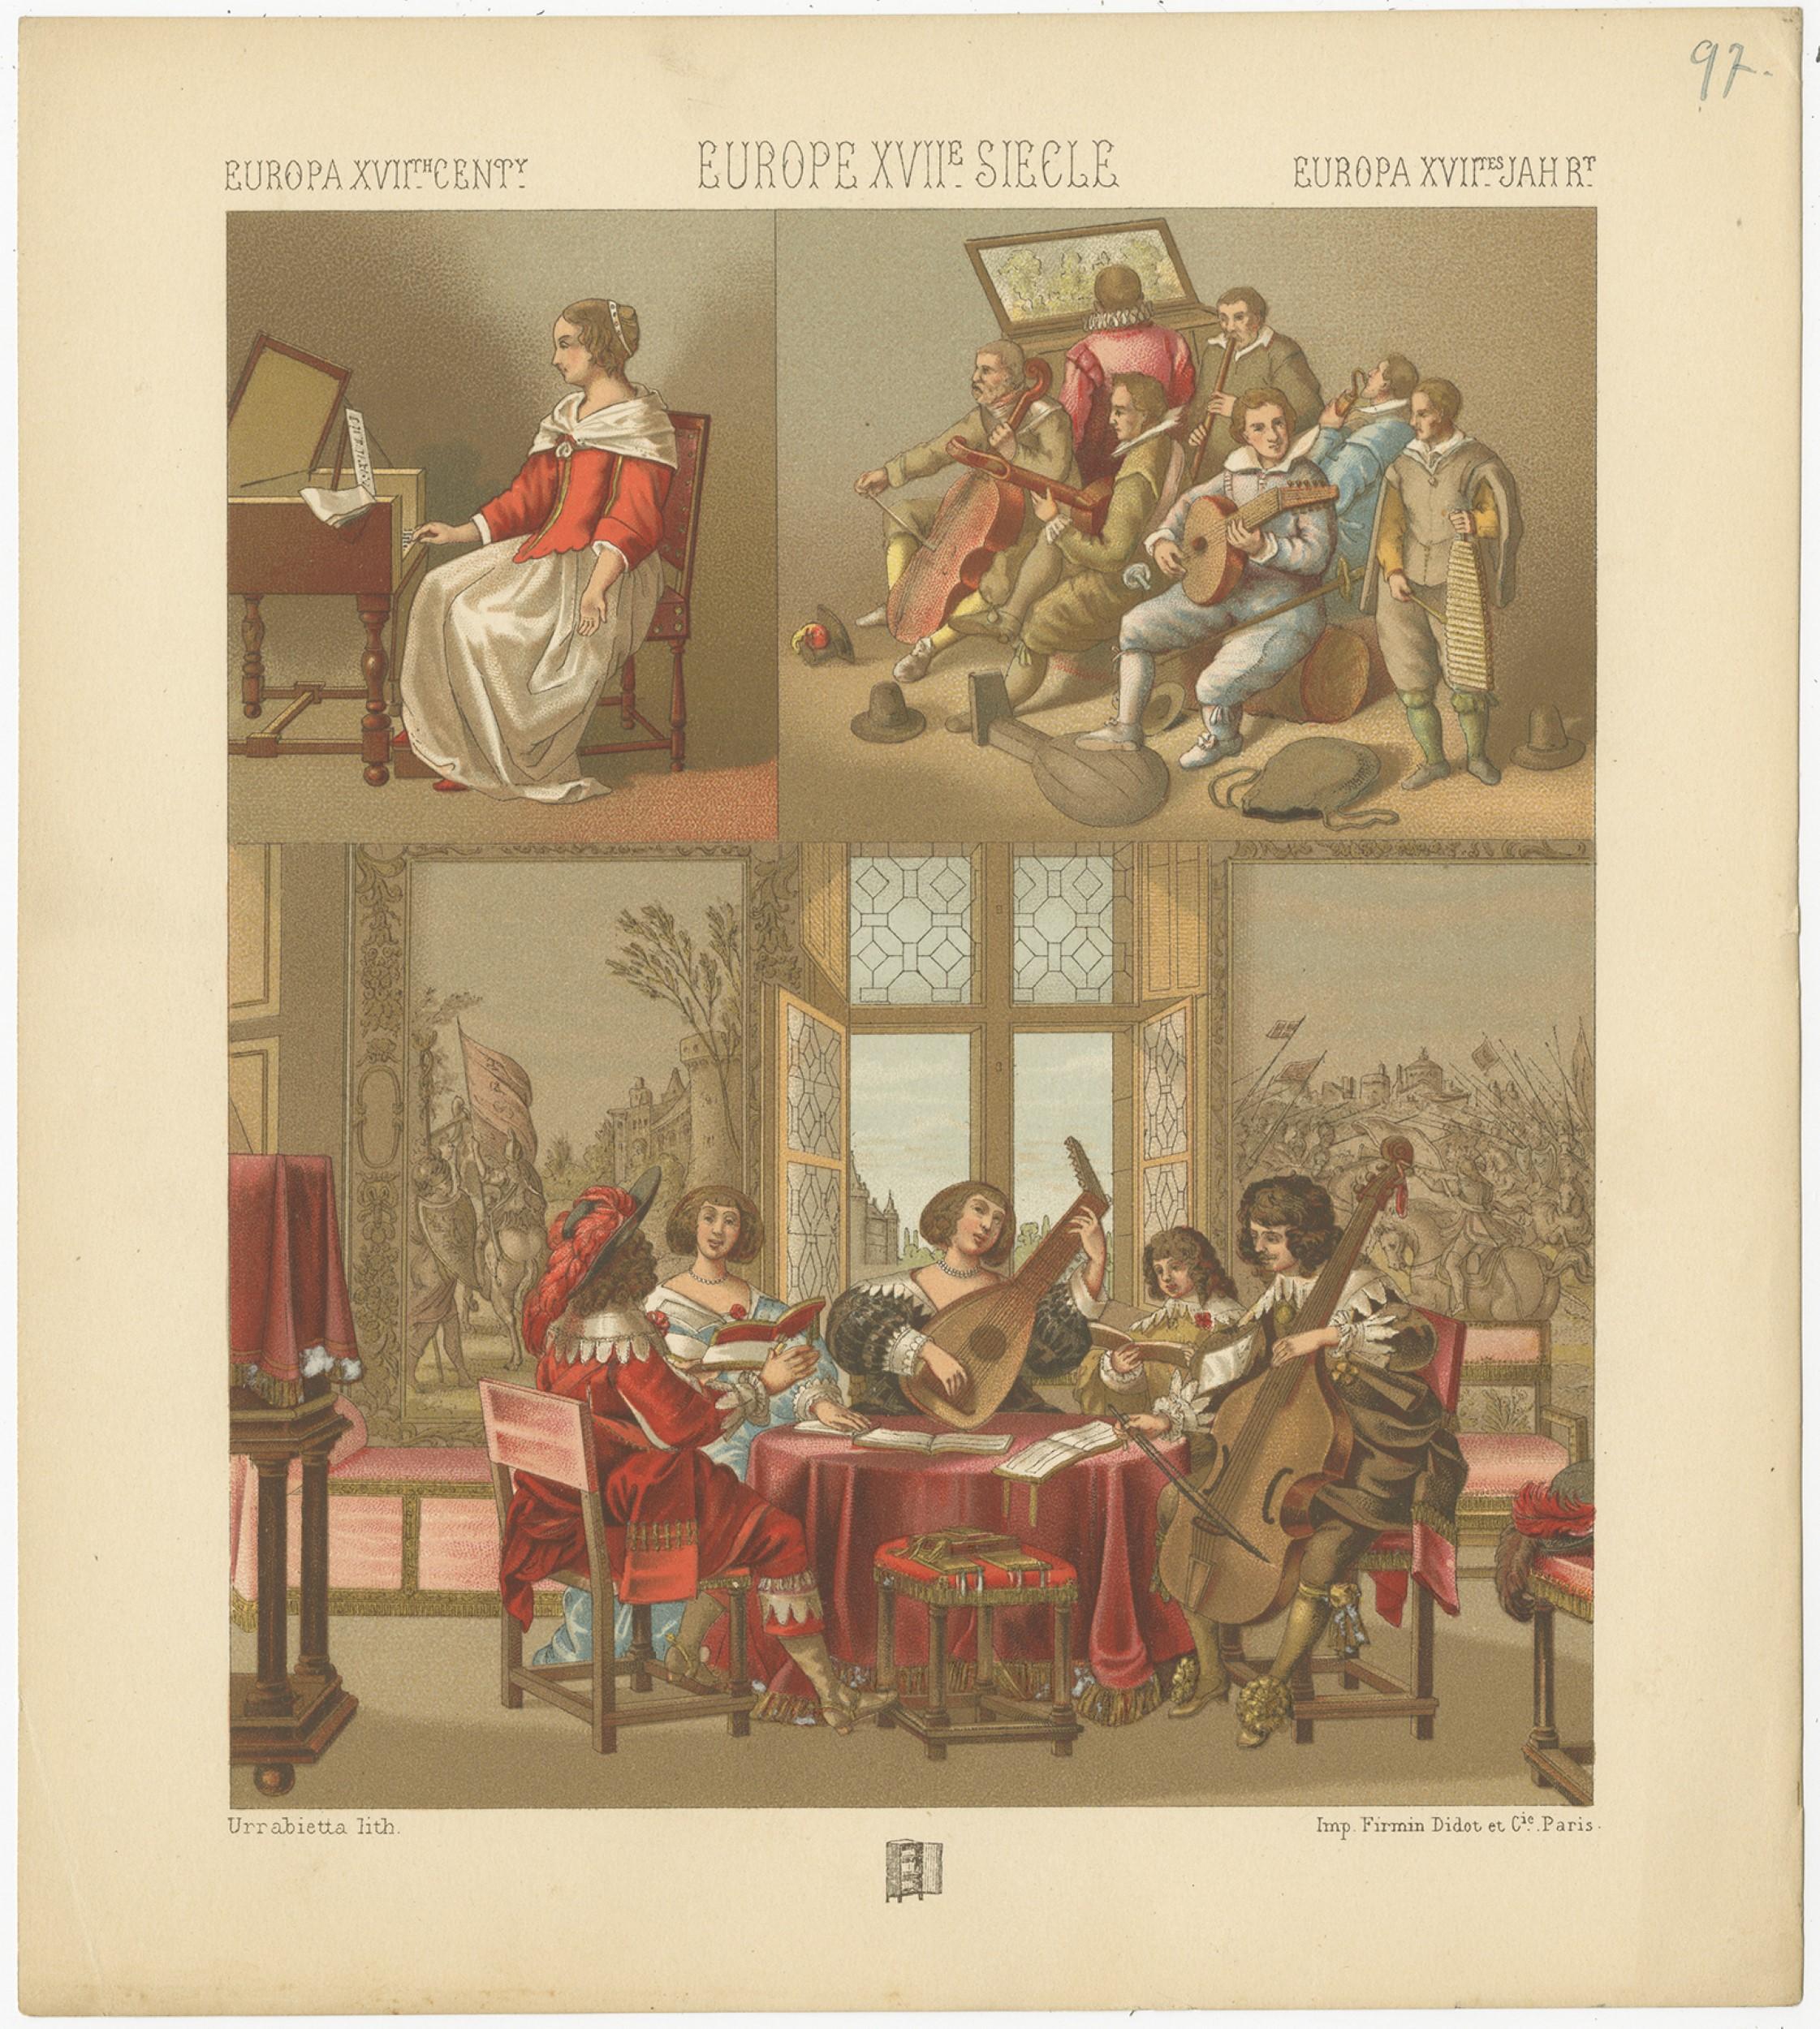 Antique print titled 'Europa XVIIth Cent - Europe XVIIe Siecle - Europa XVIItes Jahr'. Chromolithograph of European XVIIth Century Music Scenes. This print originates from 'Le Costume Historique' by M.A. Racinet. Published, circa 1880.